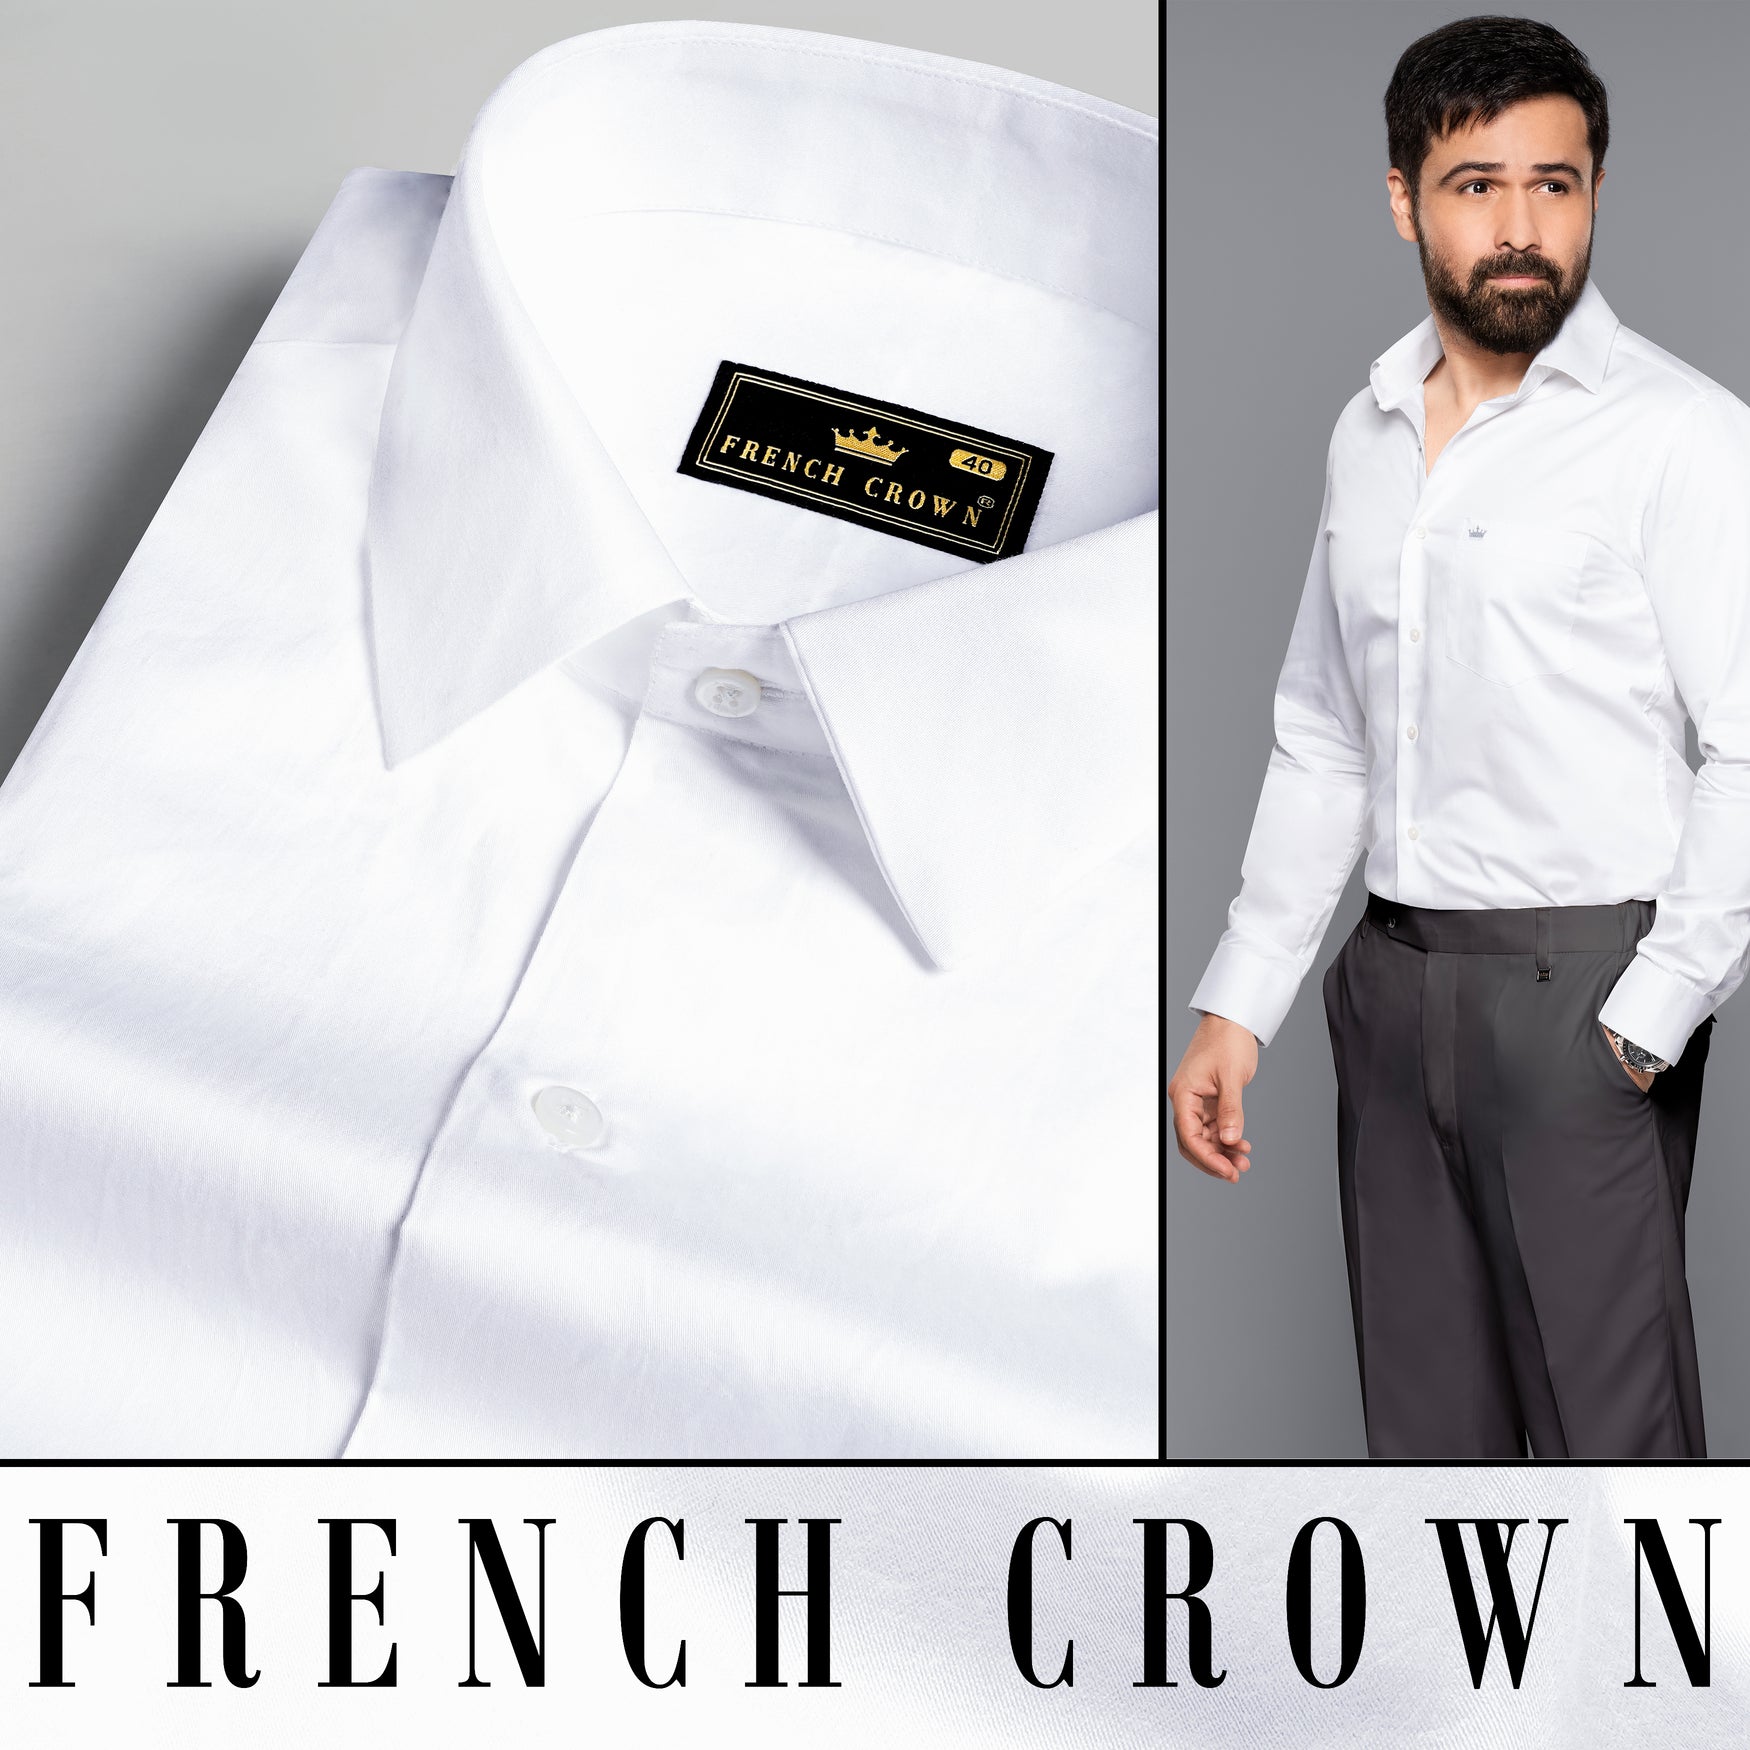 French Crown Bright White Embellished with Black Hand Casual Prints Premium Cotton Shirt For Men, 44 / XL / Full Sleeves